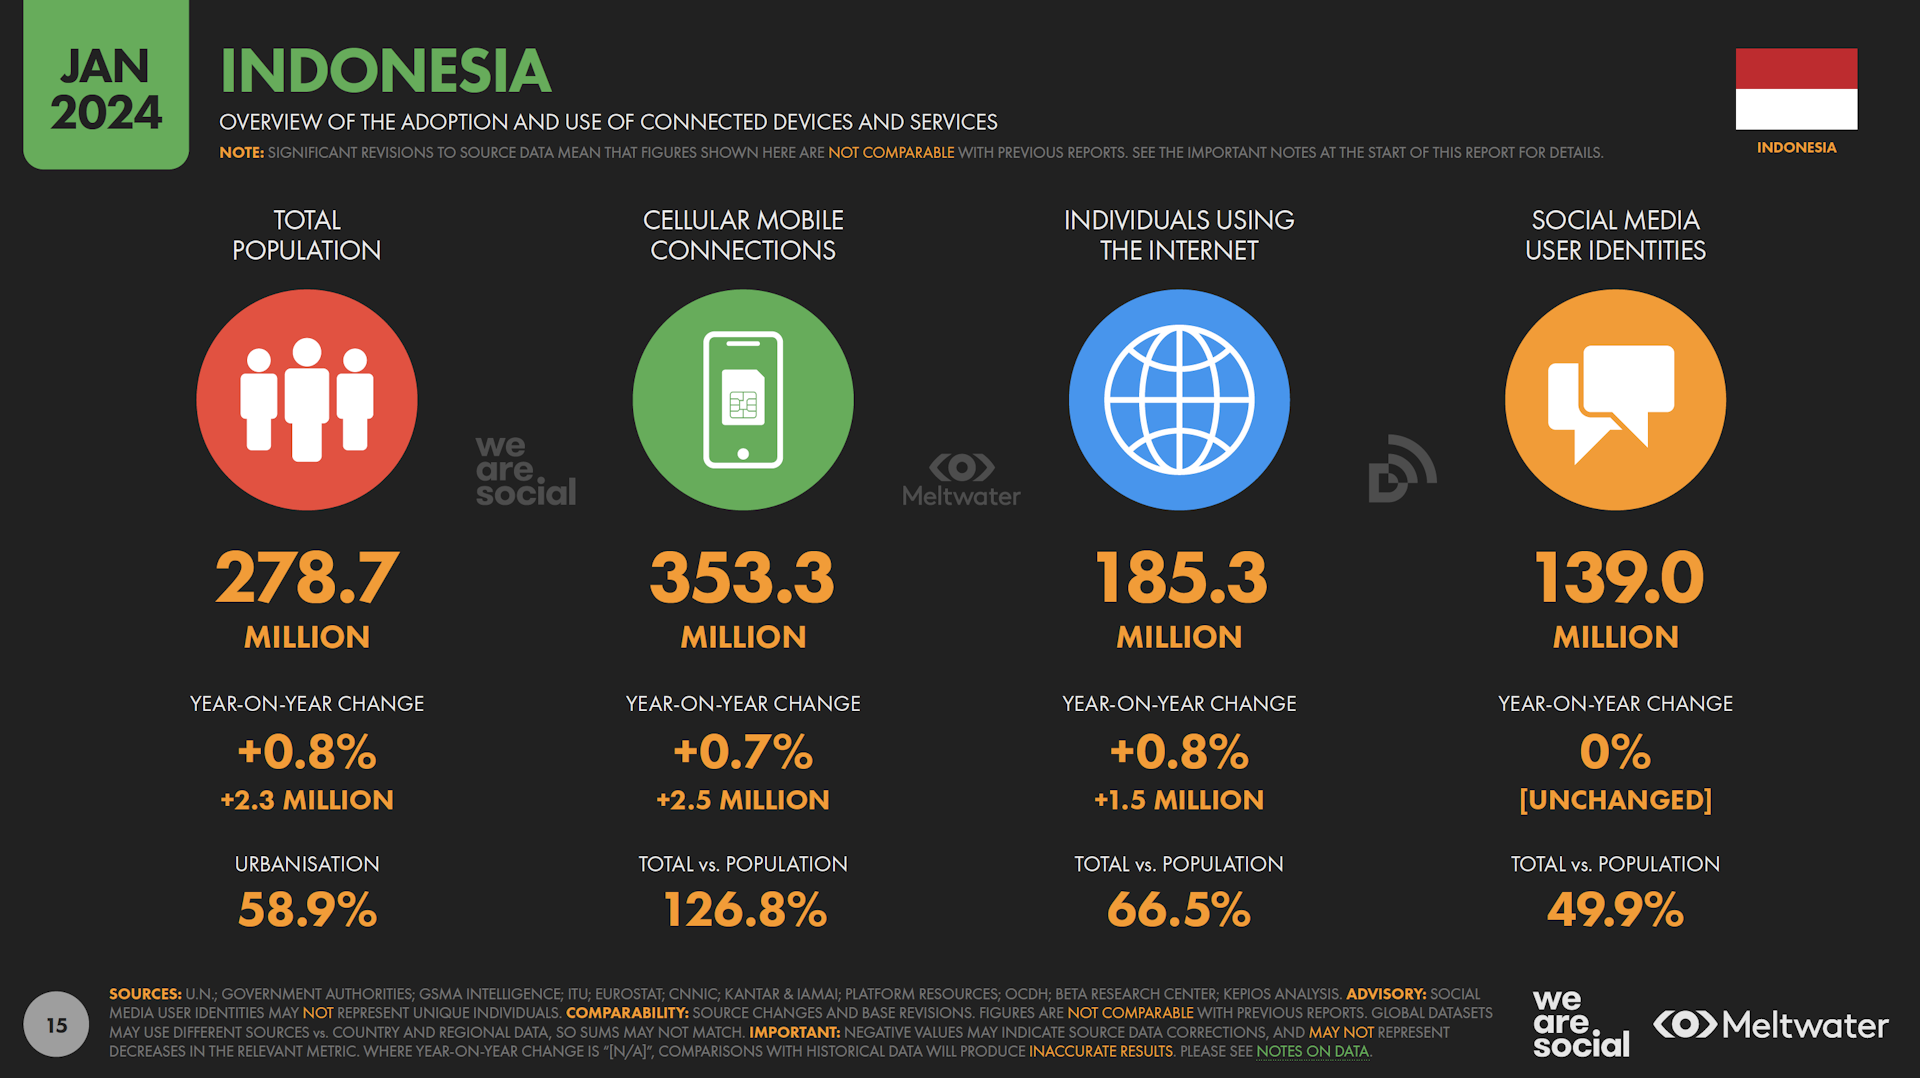 Overview of the adoption and use of connected devices and services based on Global Digital Report 2024 for Indonesia